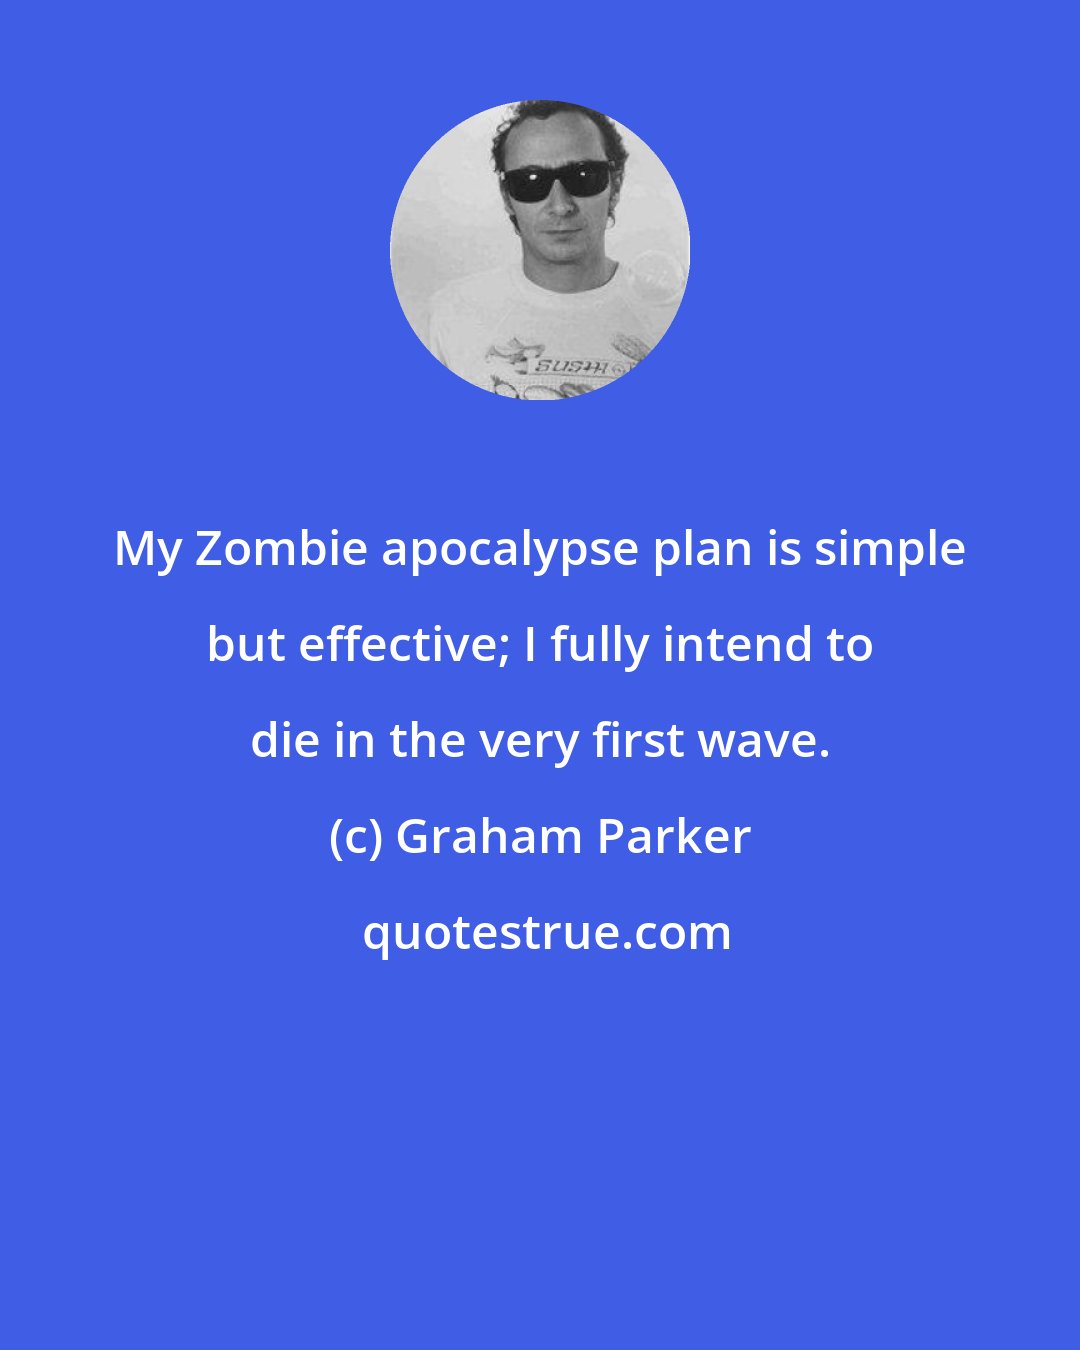 Graham Parker: My Zombie apocalypse plan is simple but effective; I fully intend to die in the very first wave.